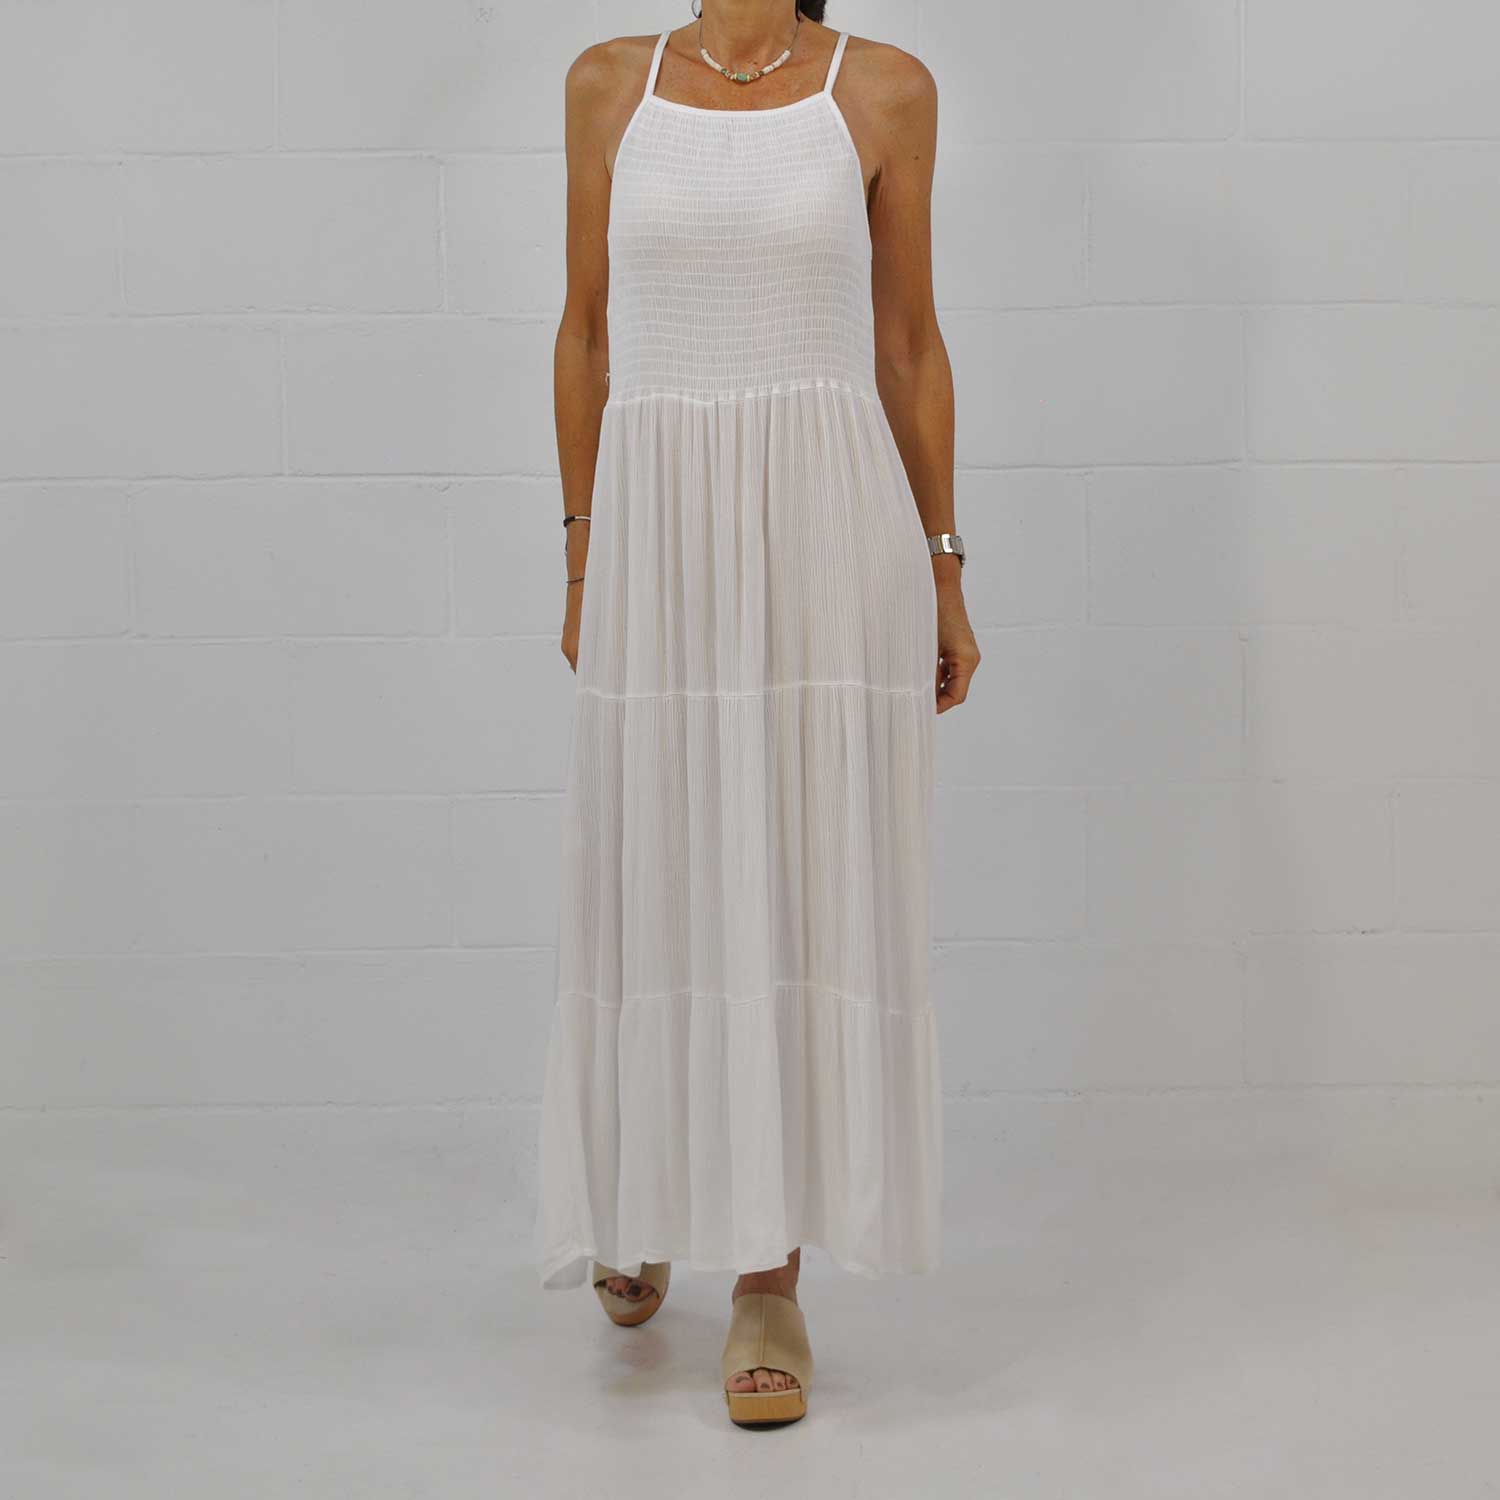 White ruched dress